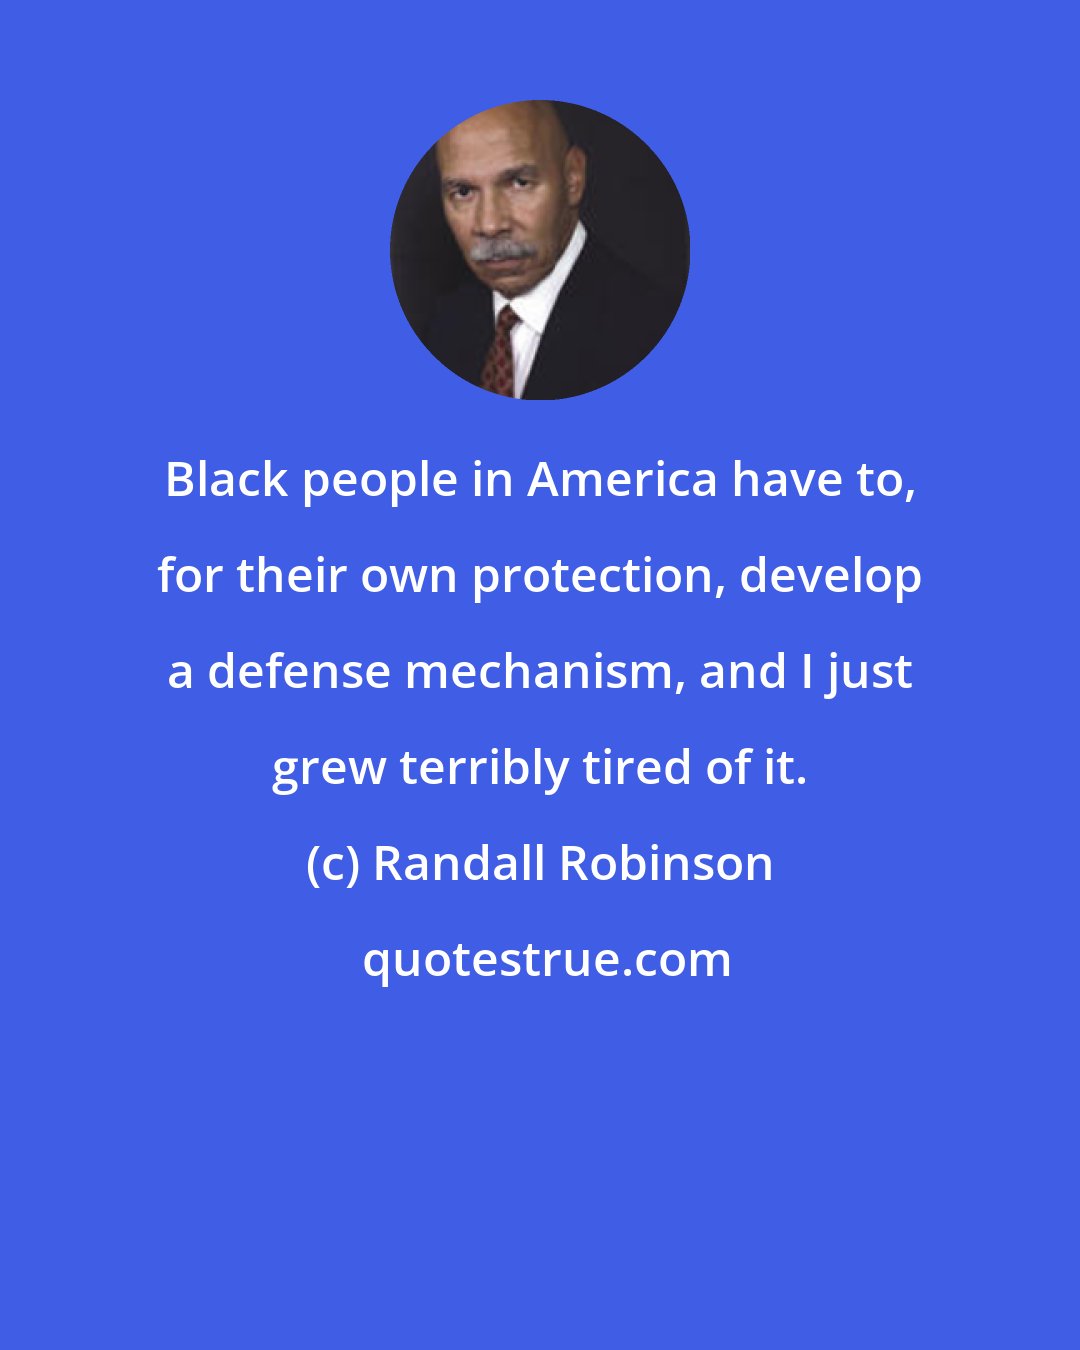 Randall Robinson: Black people in America have to, for their own protection, develop a defense mechanism, and I just grew terribly tired of it.